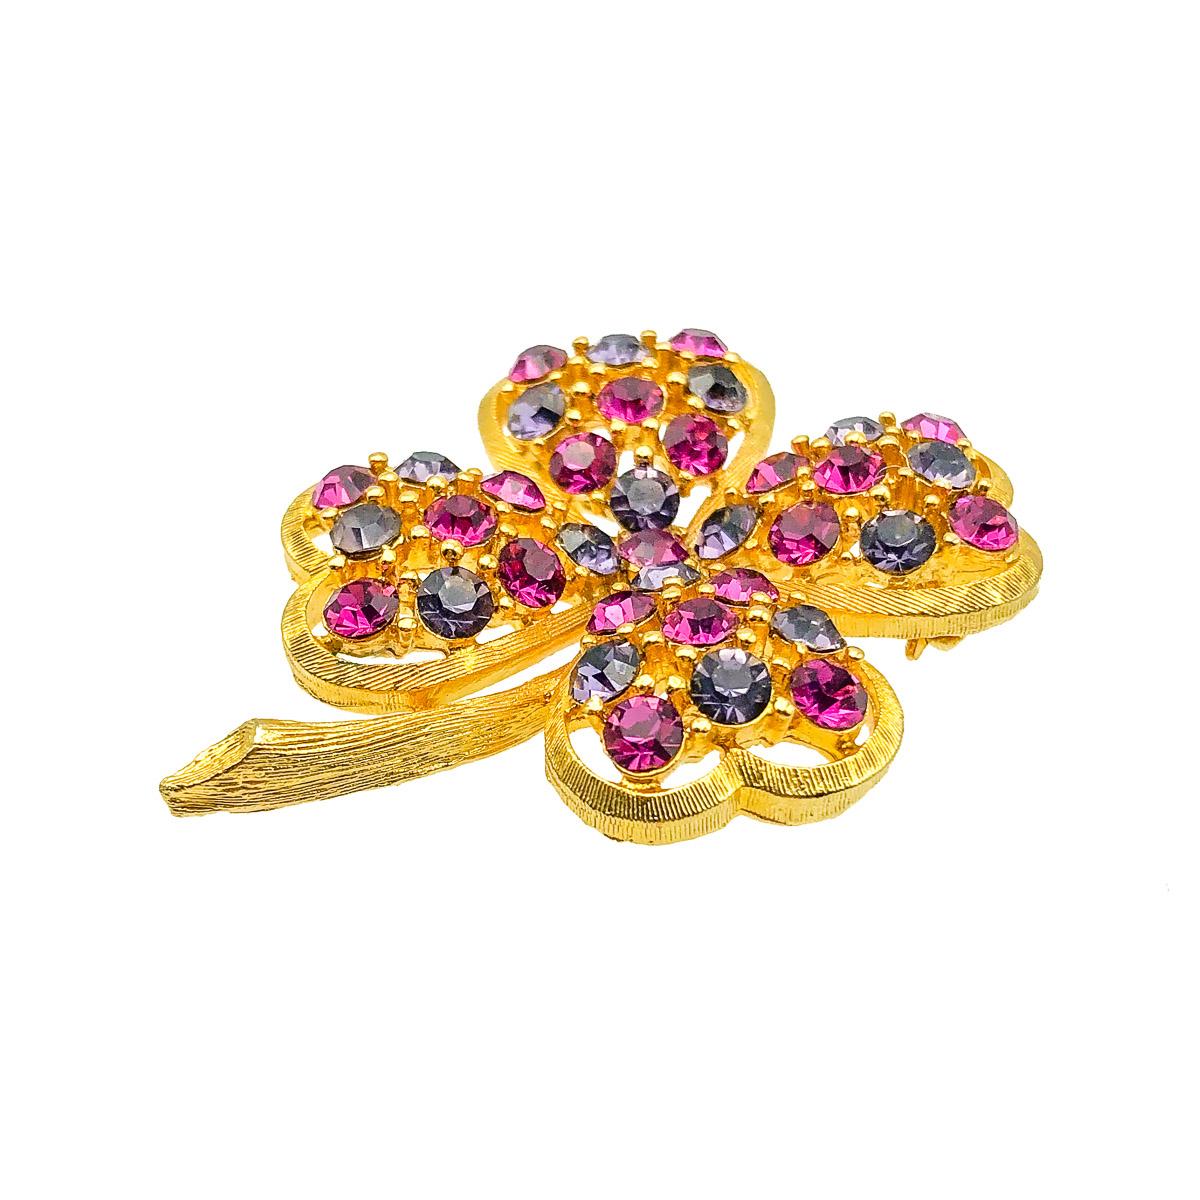 A very pretty Vintage Crystal Shamrock Brooch. The three leaves of a shamrock are said to stand for faith, hope and love. A fourth leaf is said to bring luck. Crafted in gold tone metal with pink and purple crystal stones. In very good vintage